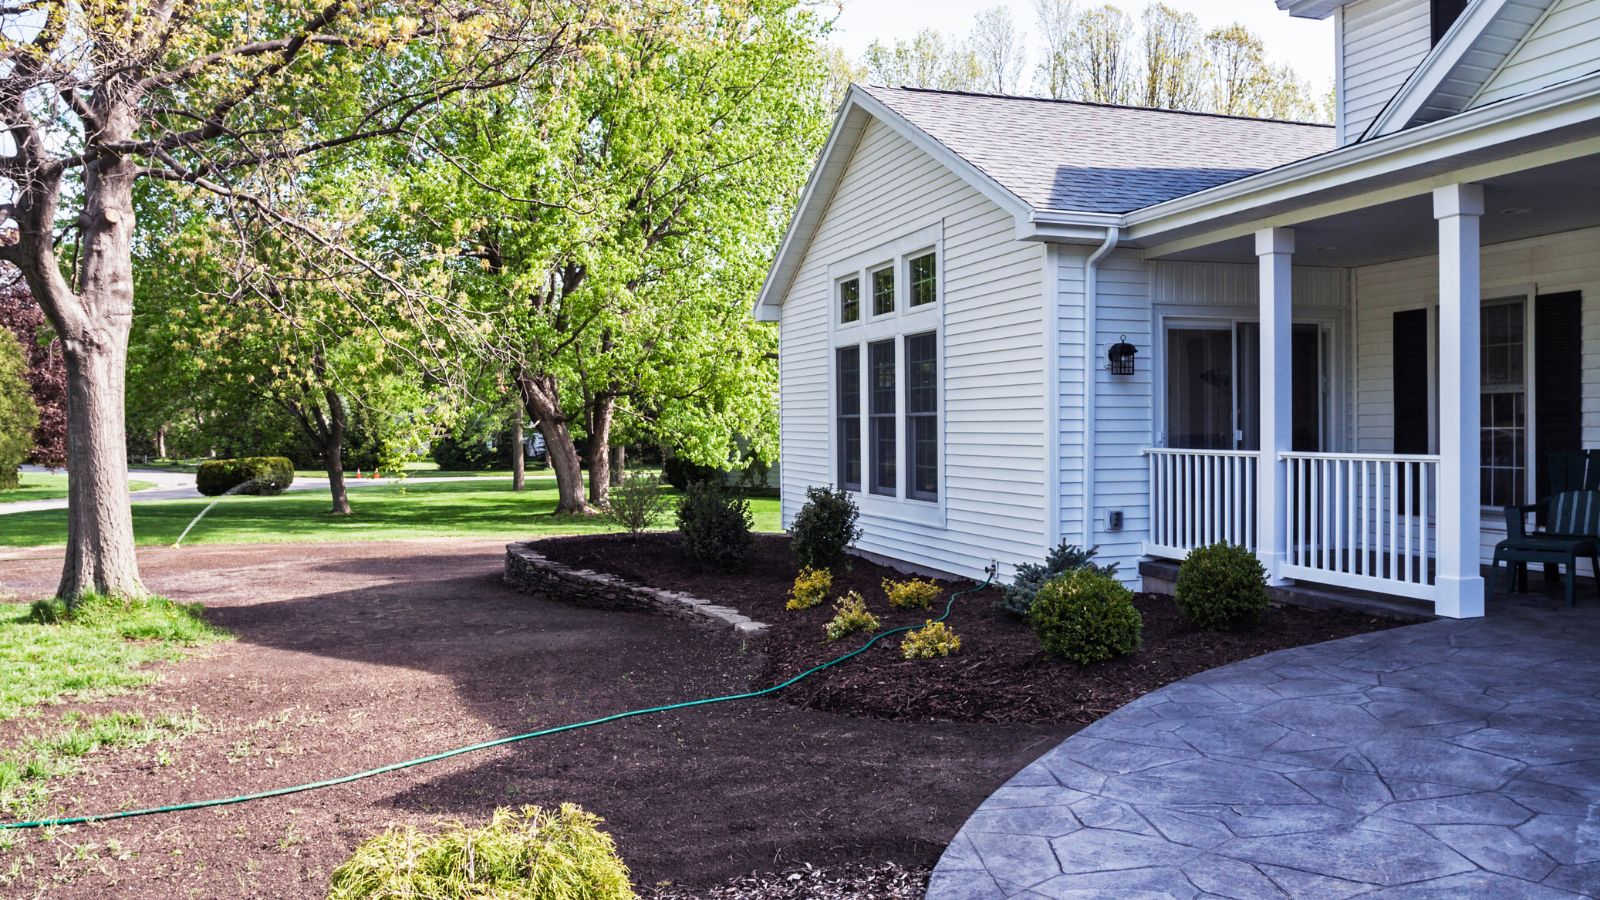 What is better for landscaping rock or mulch?